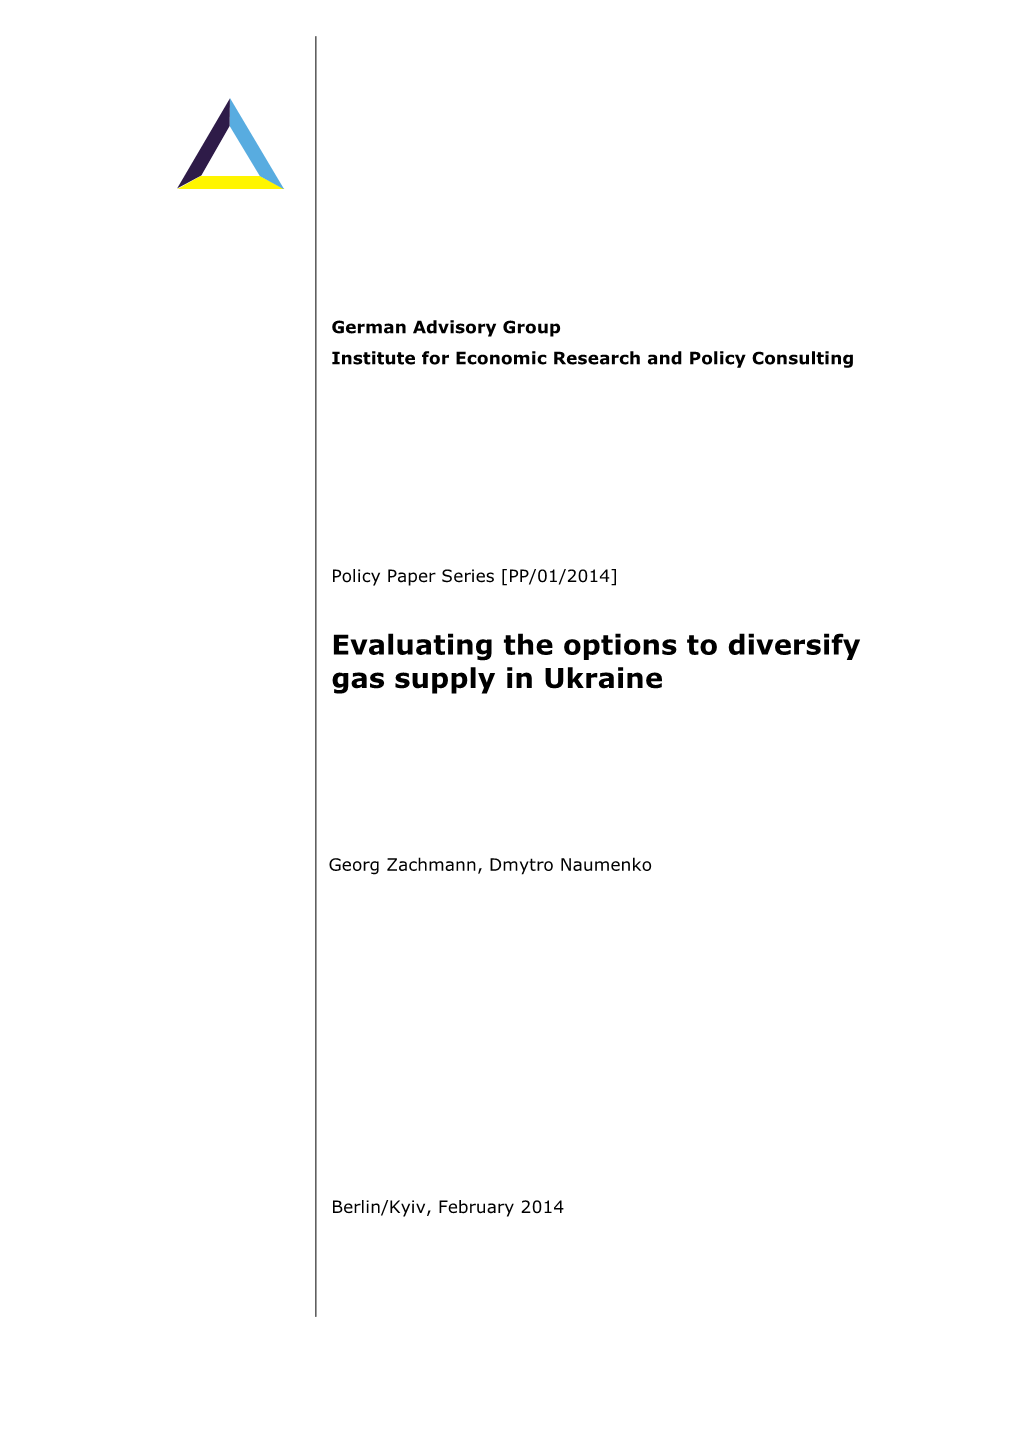 Evaluating the Options to Diversify Gas Supply in Ukraine